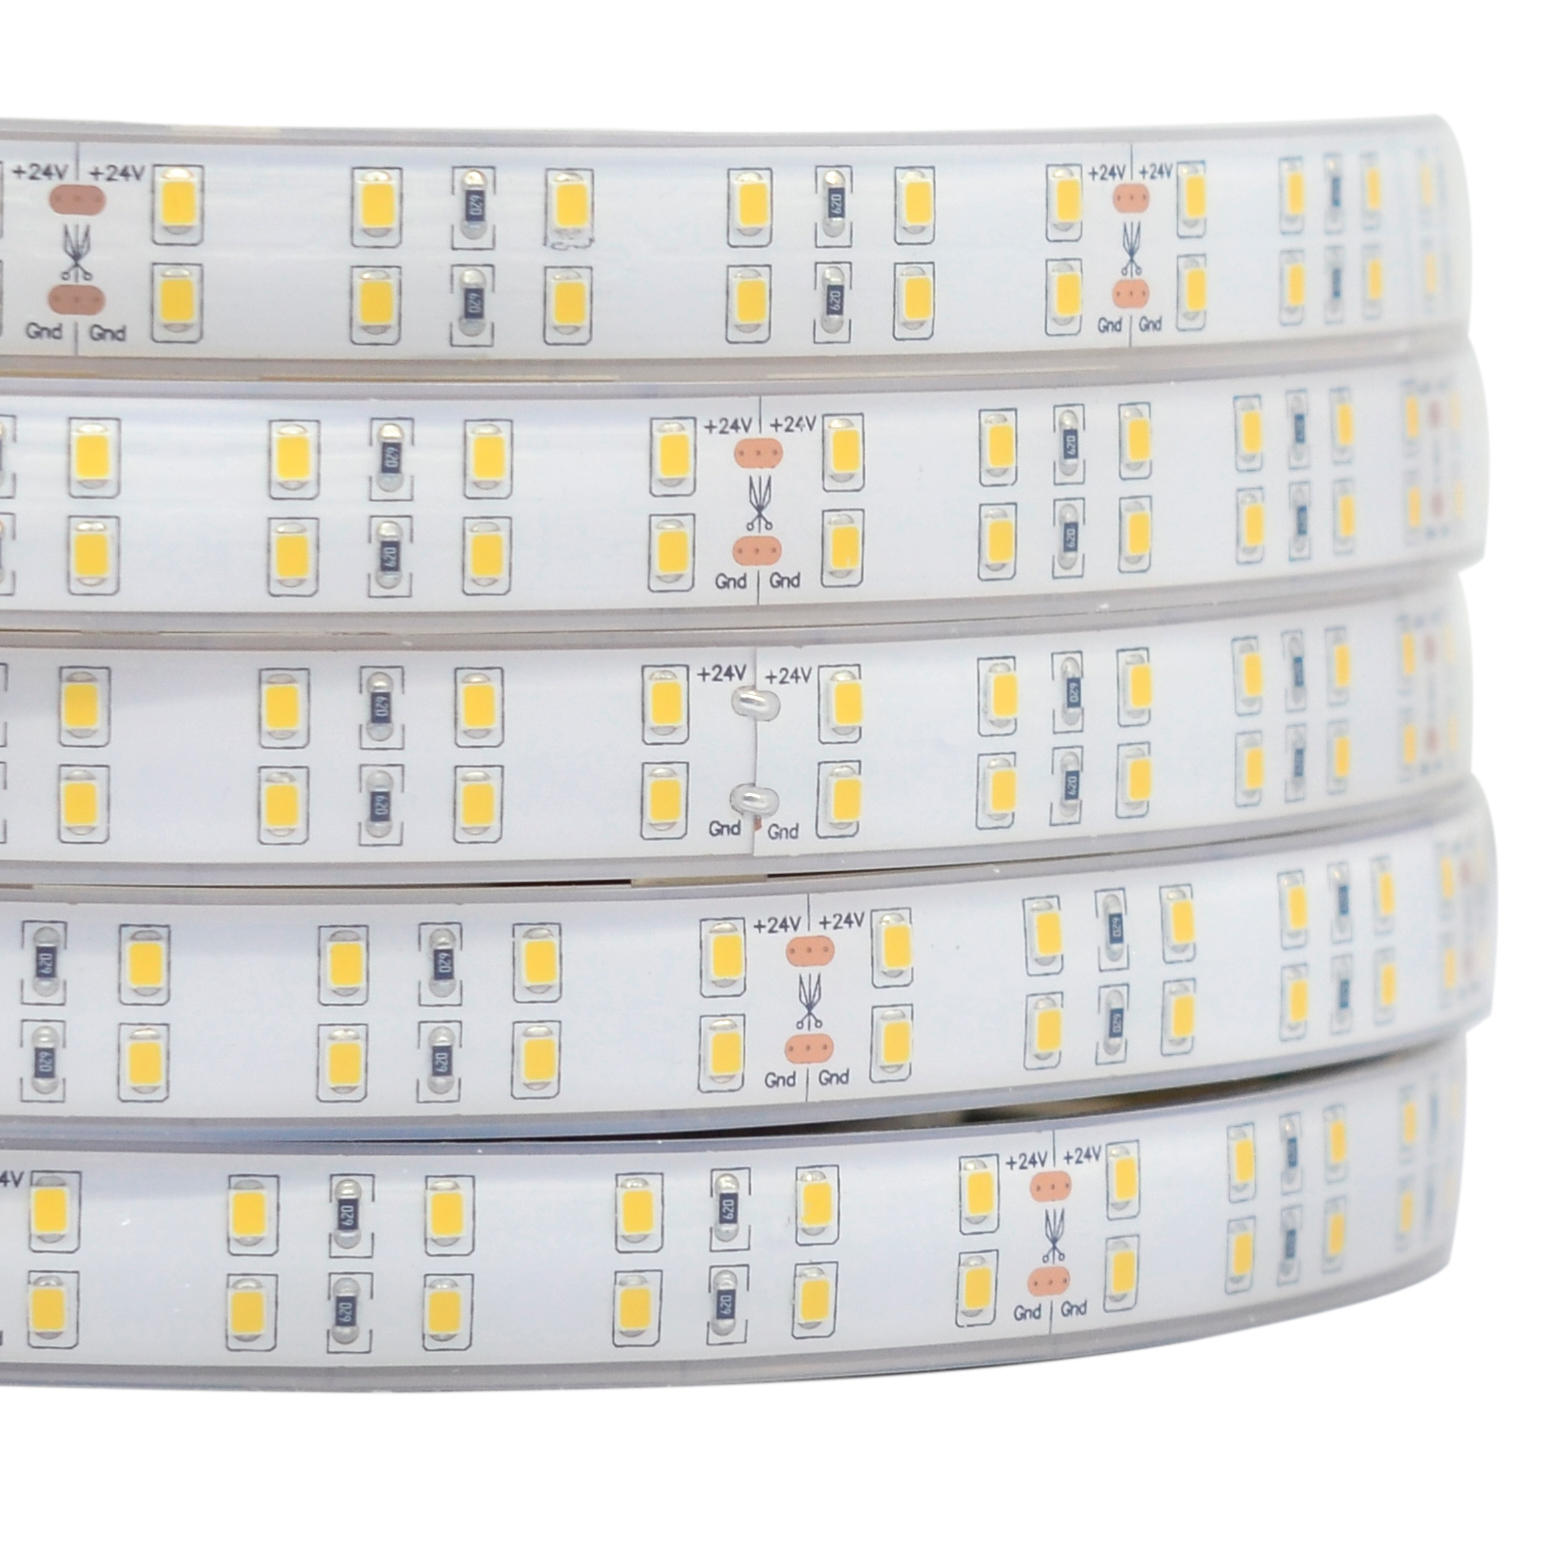 Double Row Series DC24V 2835SMD 720LEDs Flexible LED Strip Lights Outdoor Lighting Waterproof Optional 16.4ft Per Reel By Sale